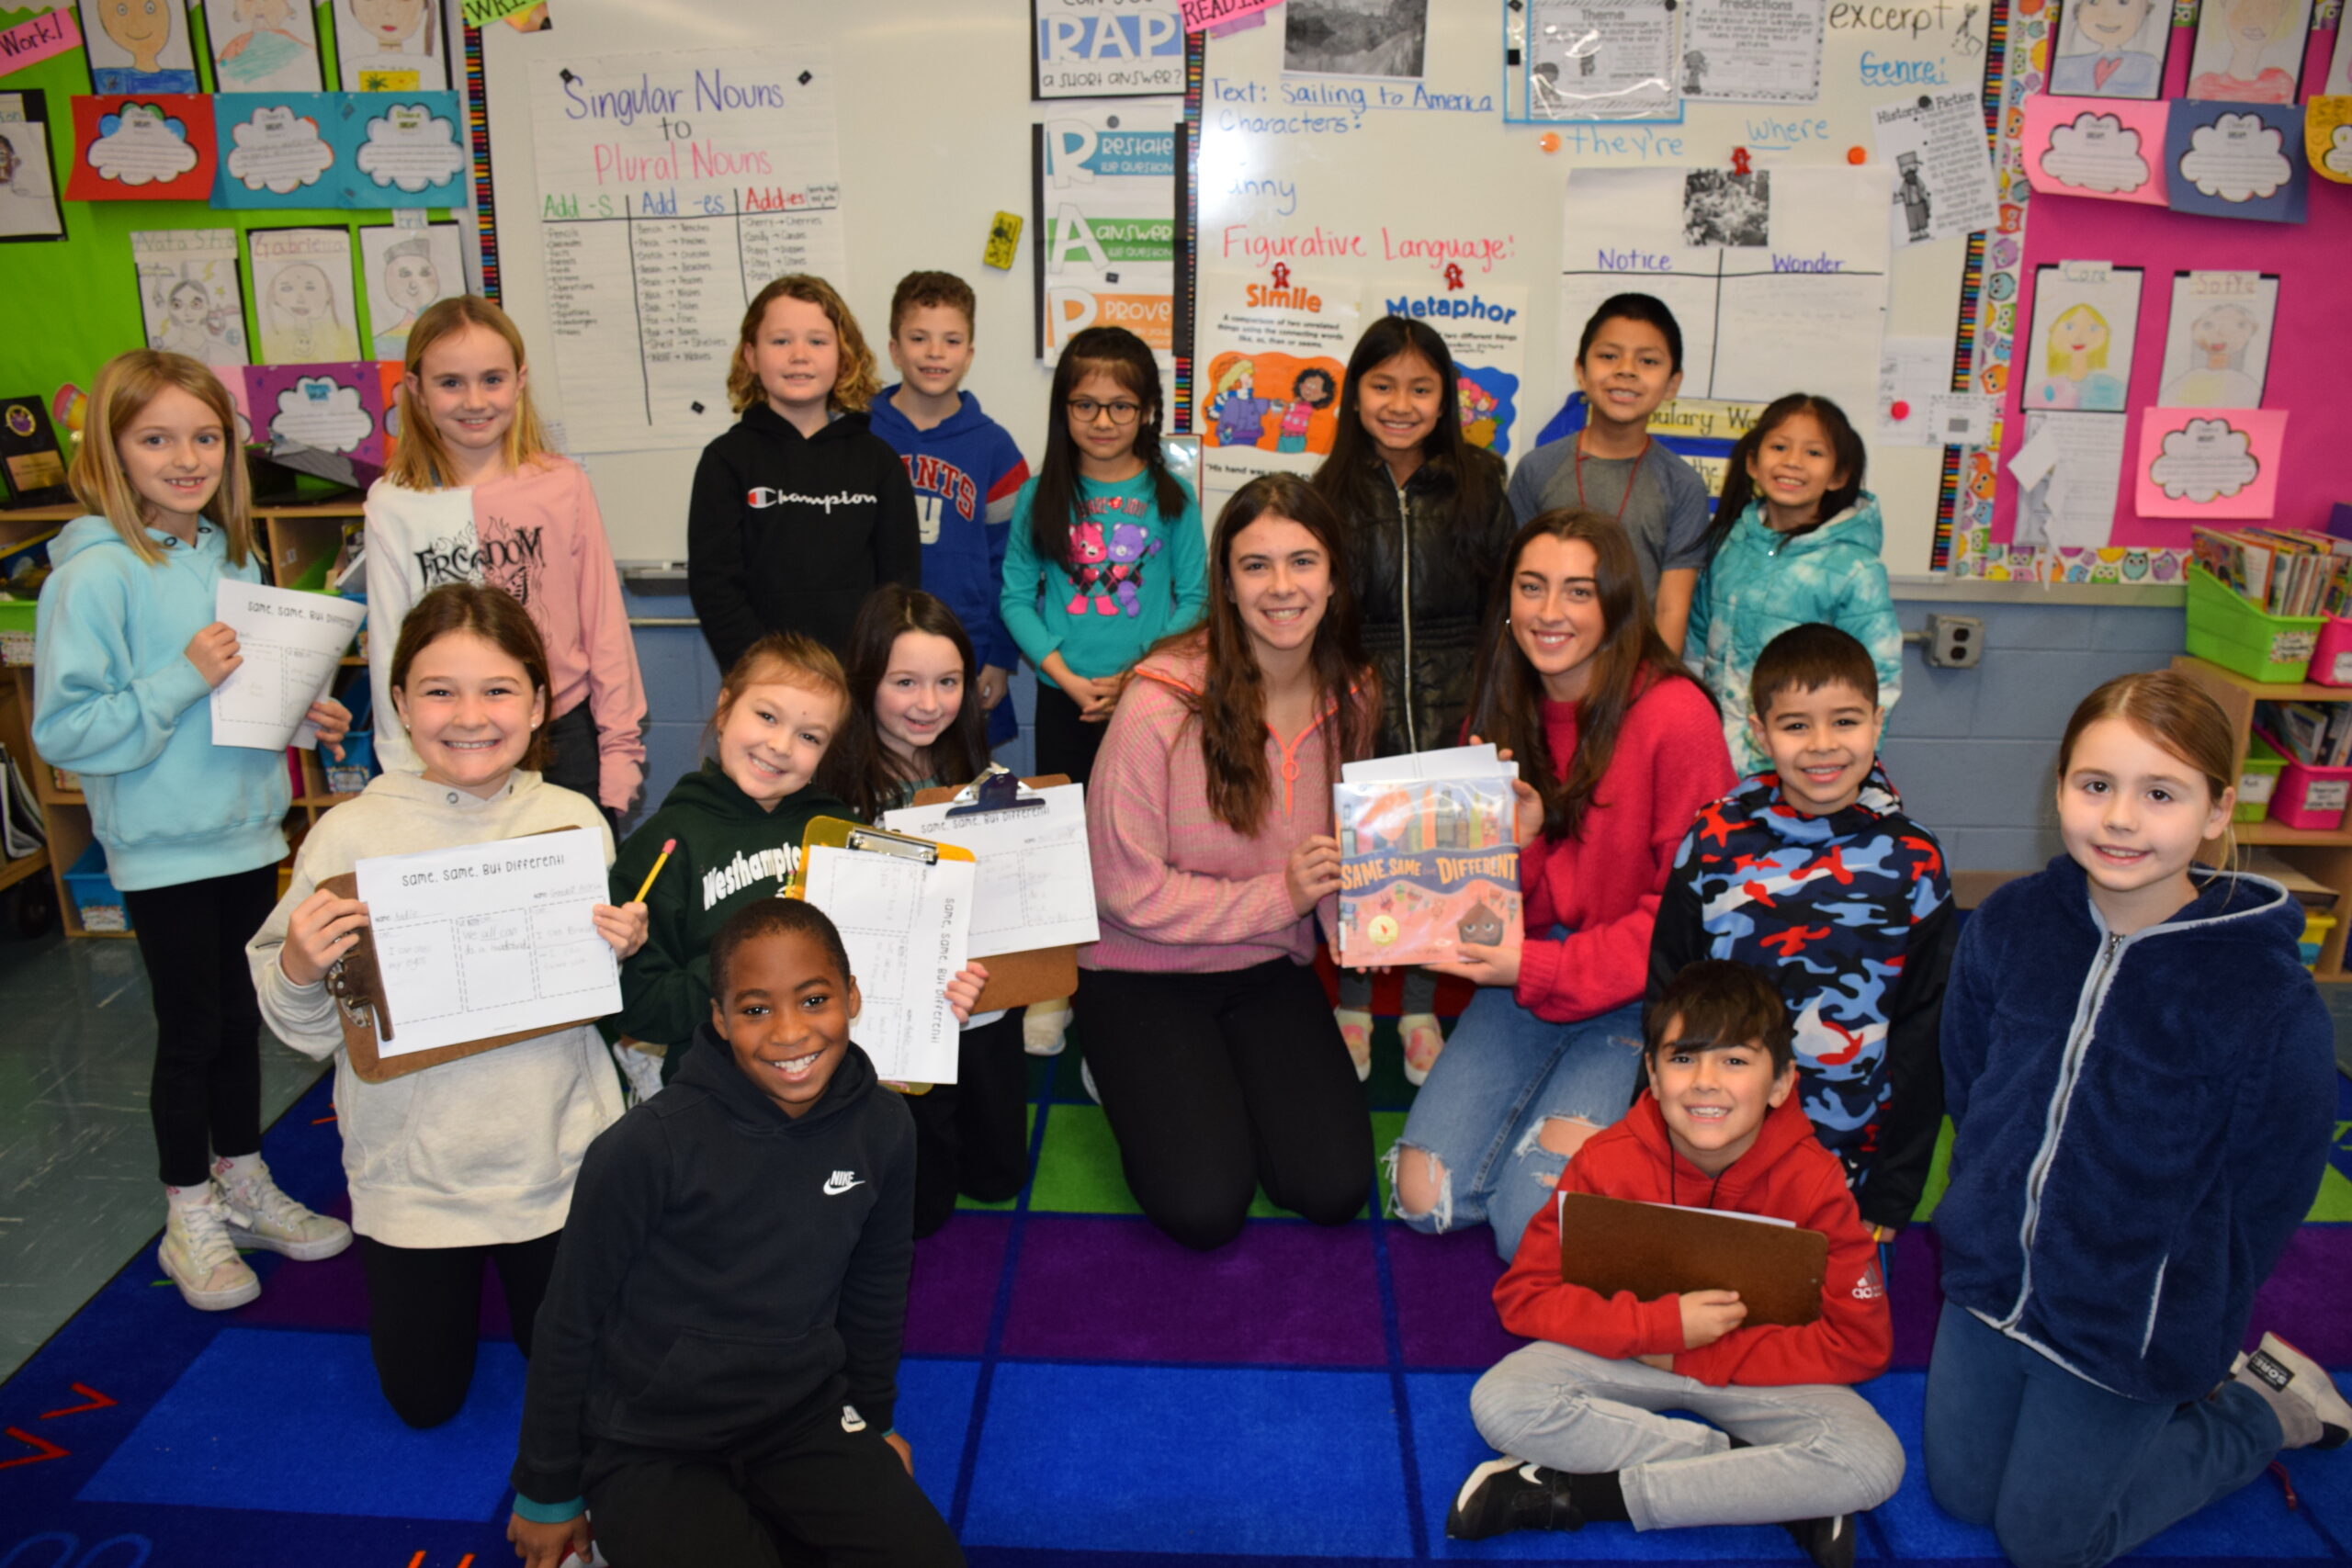 Westhampton Beach High School students recently volunteered to read books to students at Westhampton Beach Elementary School as part of activities associated with Black History Month.  COURTESY WESTHAMPTON BEACH SCHOOL DISTRICT